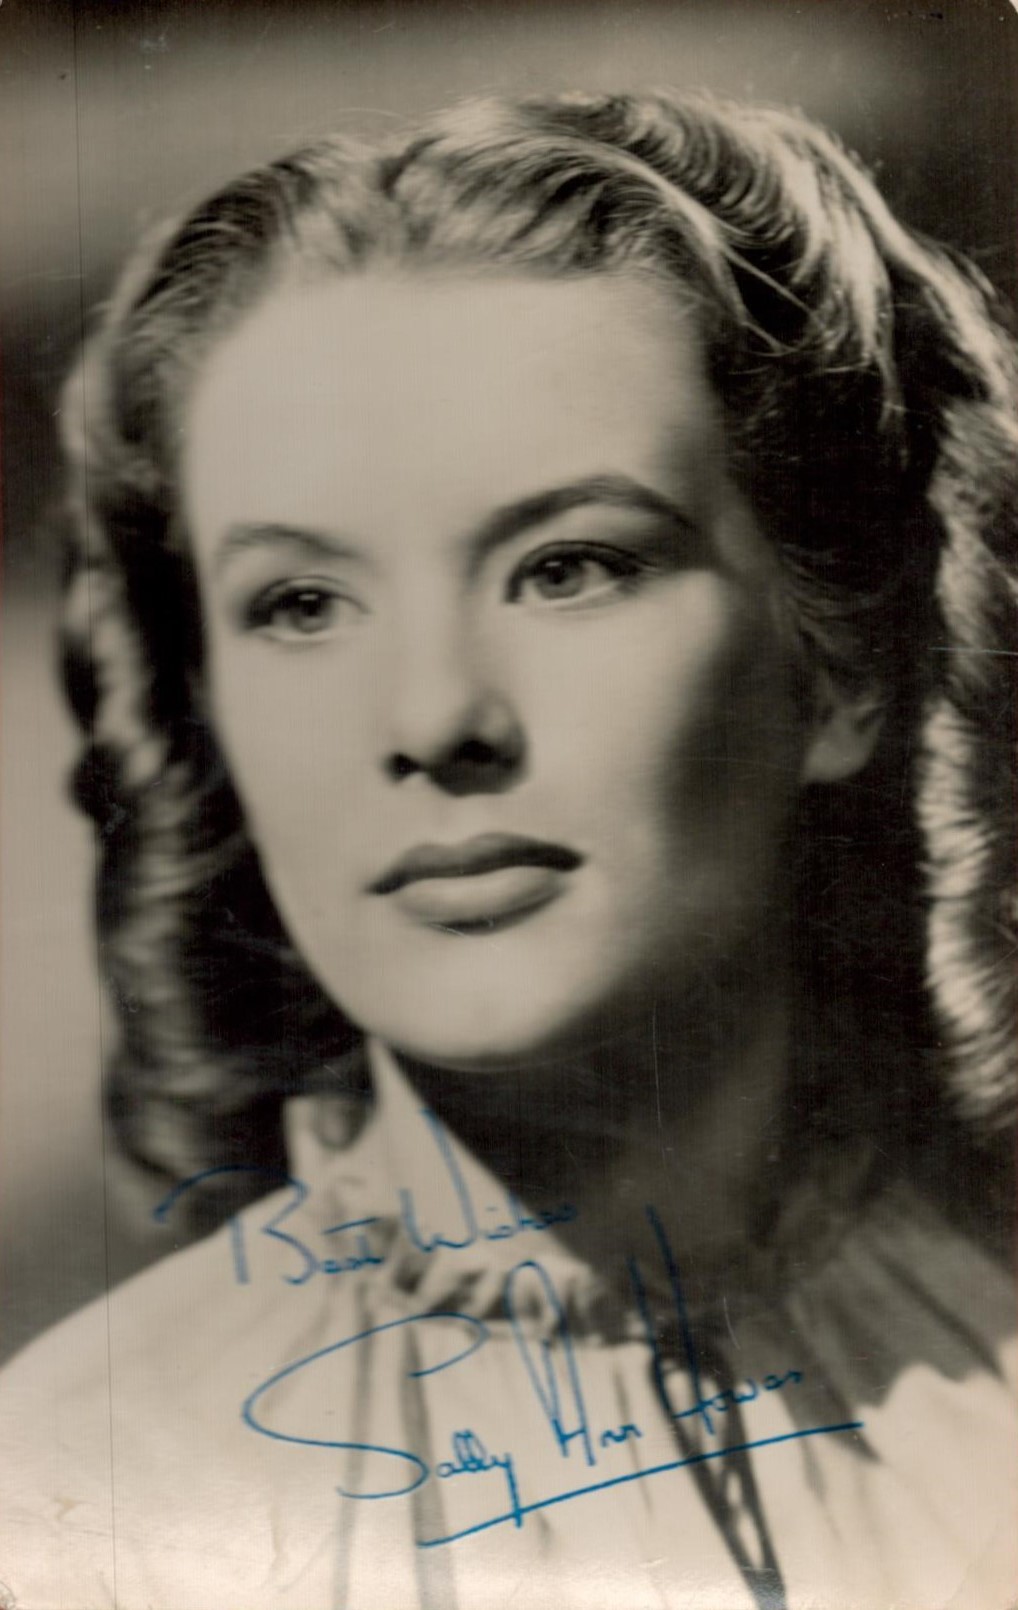 Sally Ann Howes Signed 5 x 3 inch Black and White Photo. Signed in blue ink. Good Condition. All